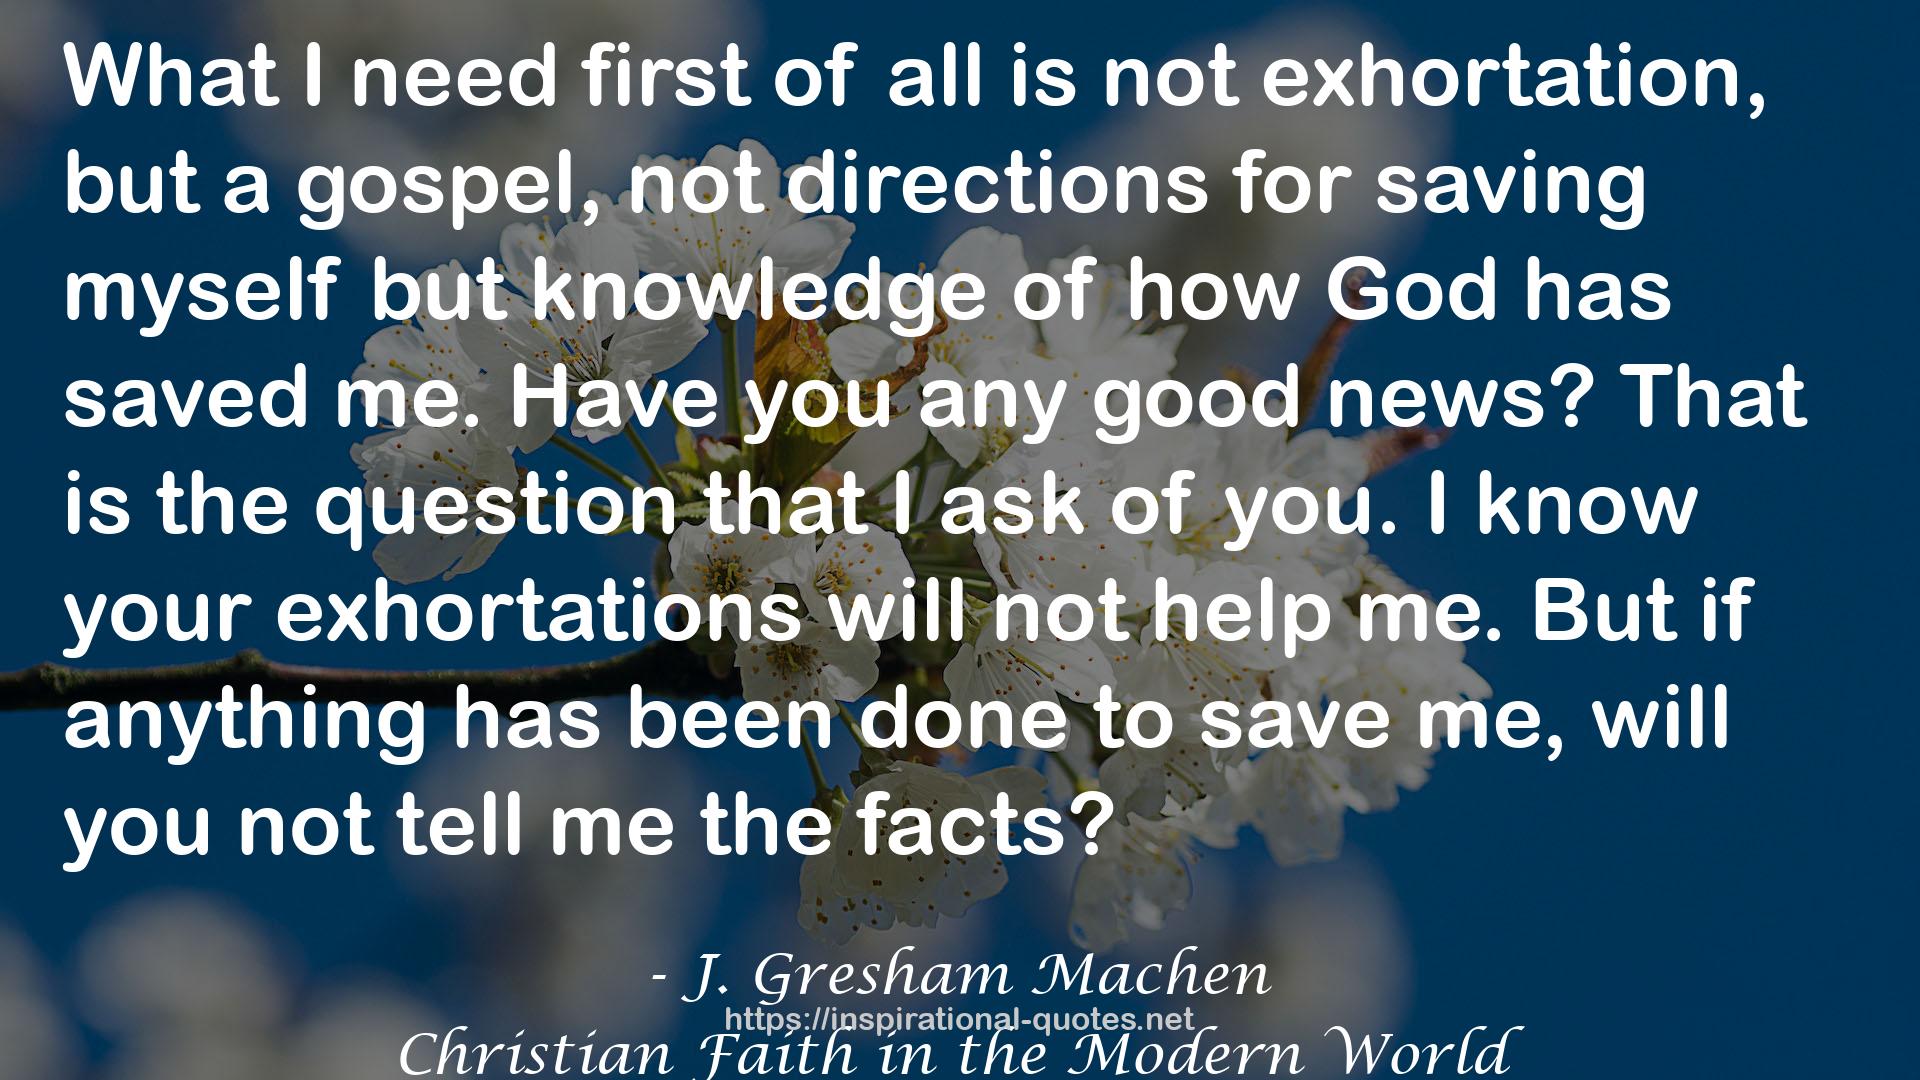 Christian Faith in the Modern World QUOTES